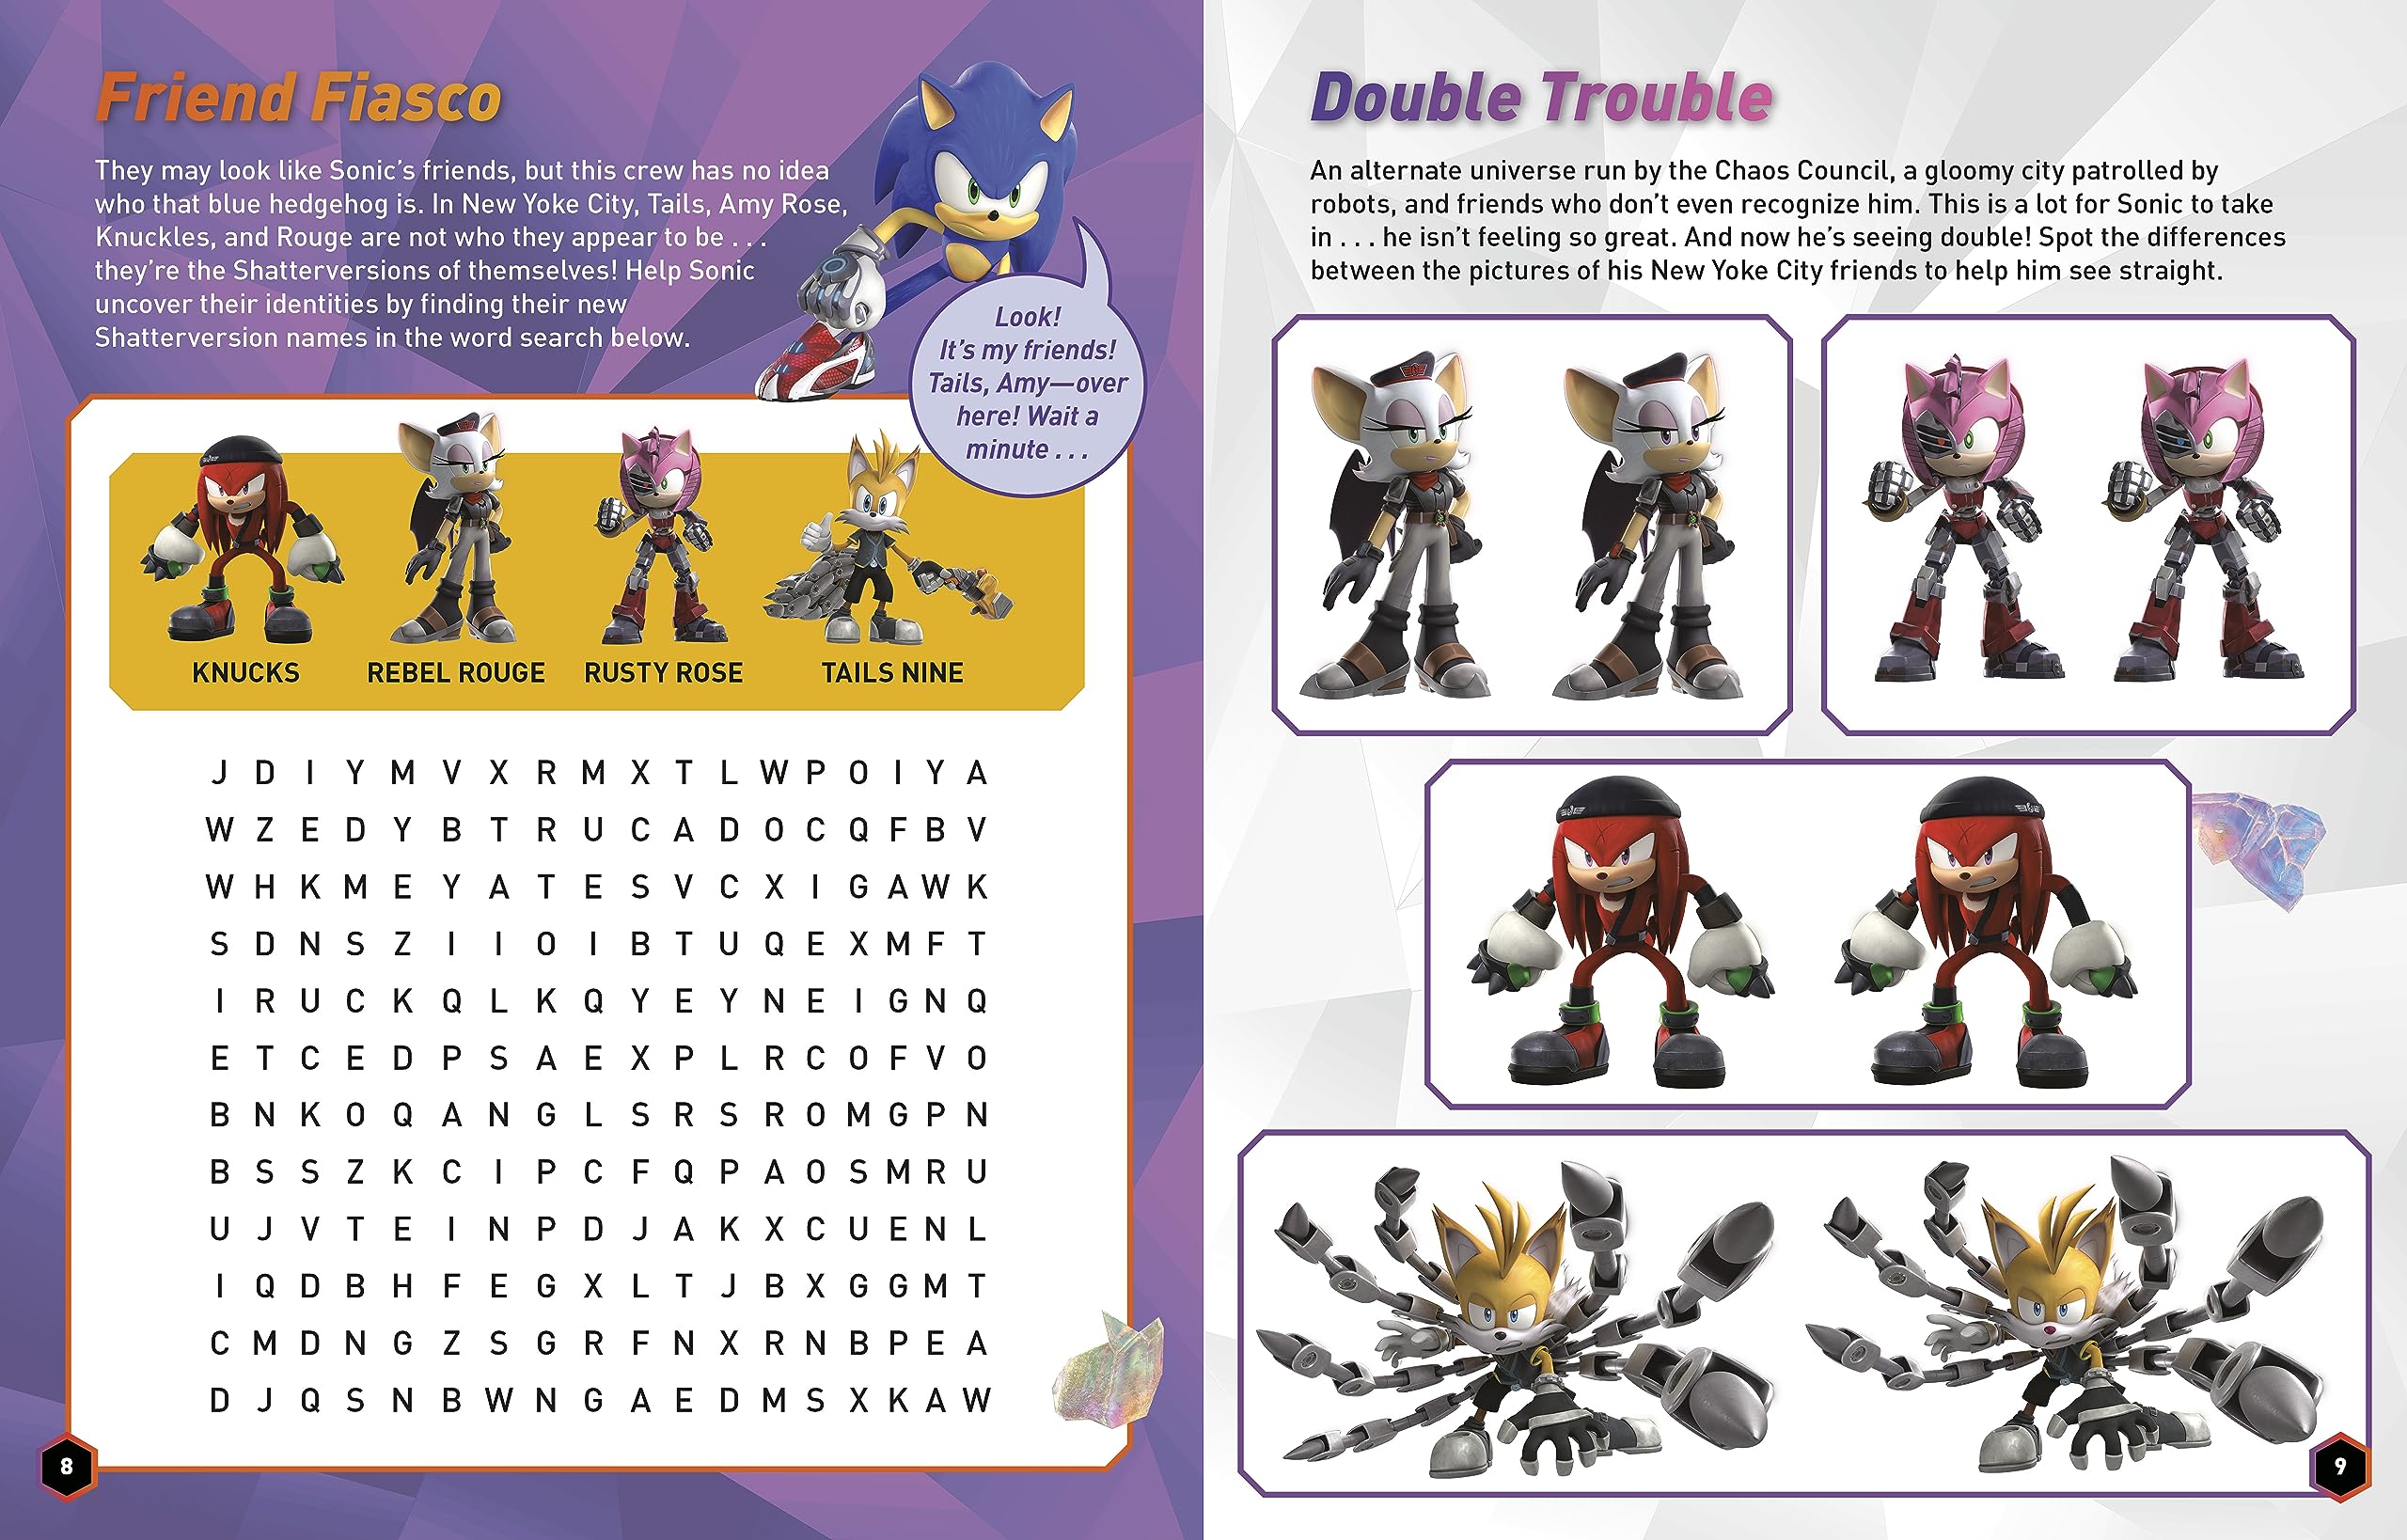 Sonic Prime Sticker & Activity Book: Includes 40+ stickers (Sonic the Hedgehog)